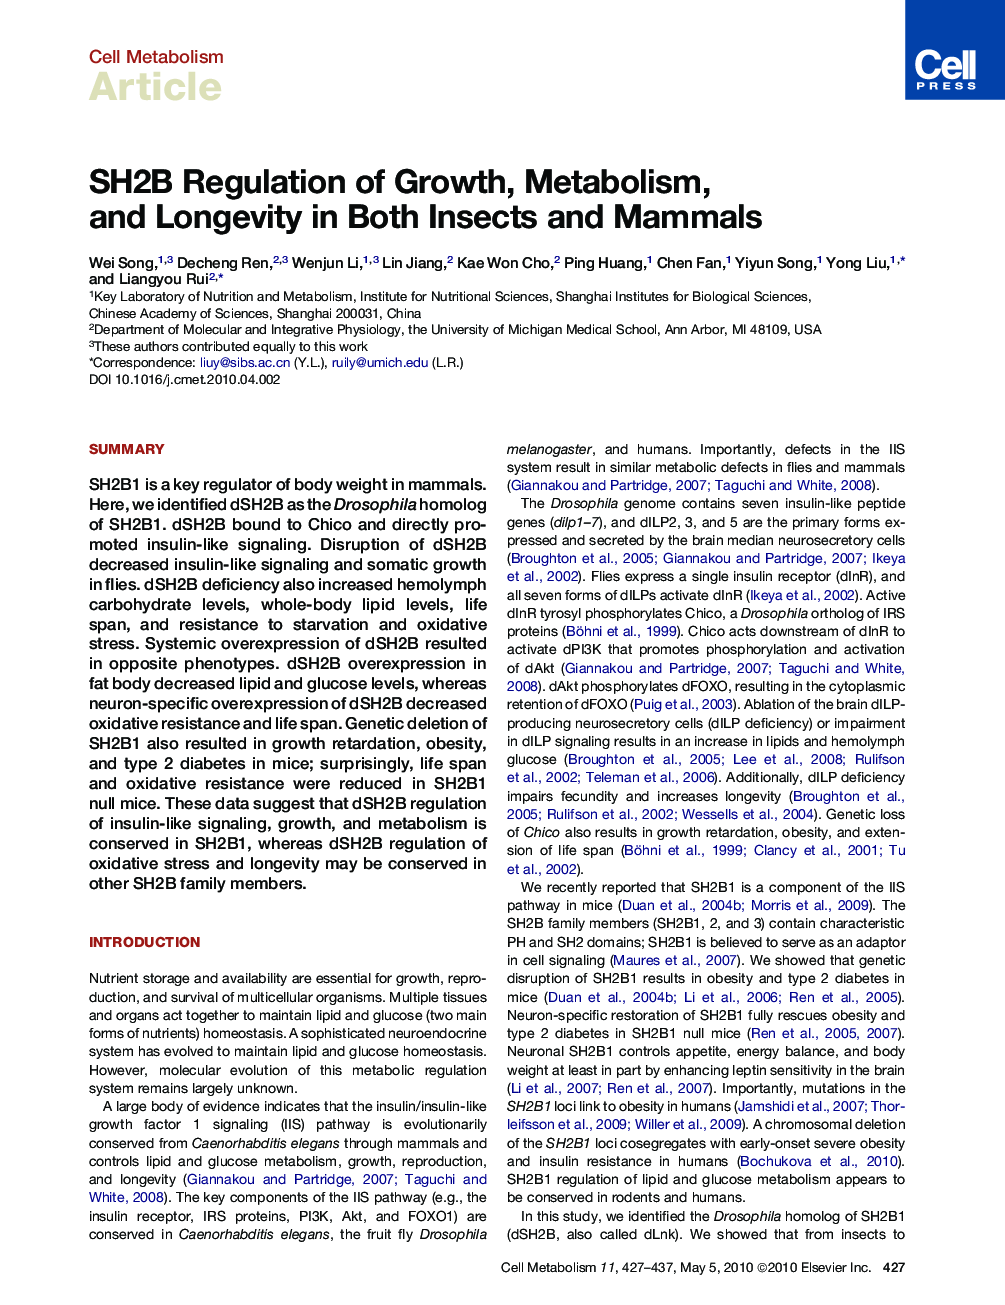 SH2B Regulation of Growth, Metabolism, and Longevity in Both Insects and Mammals